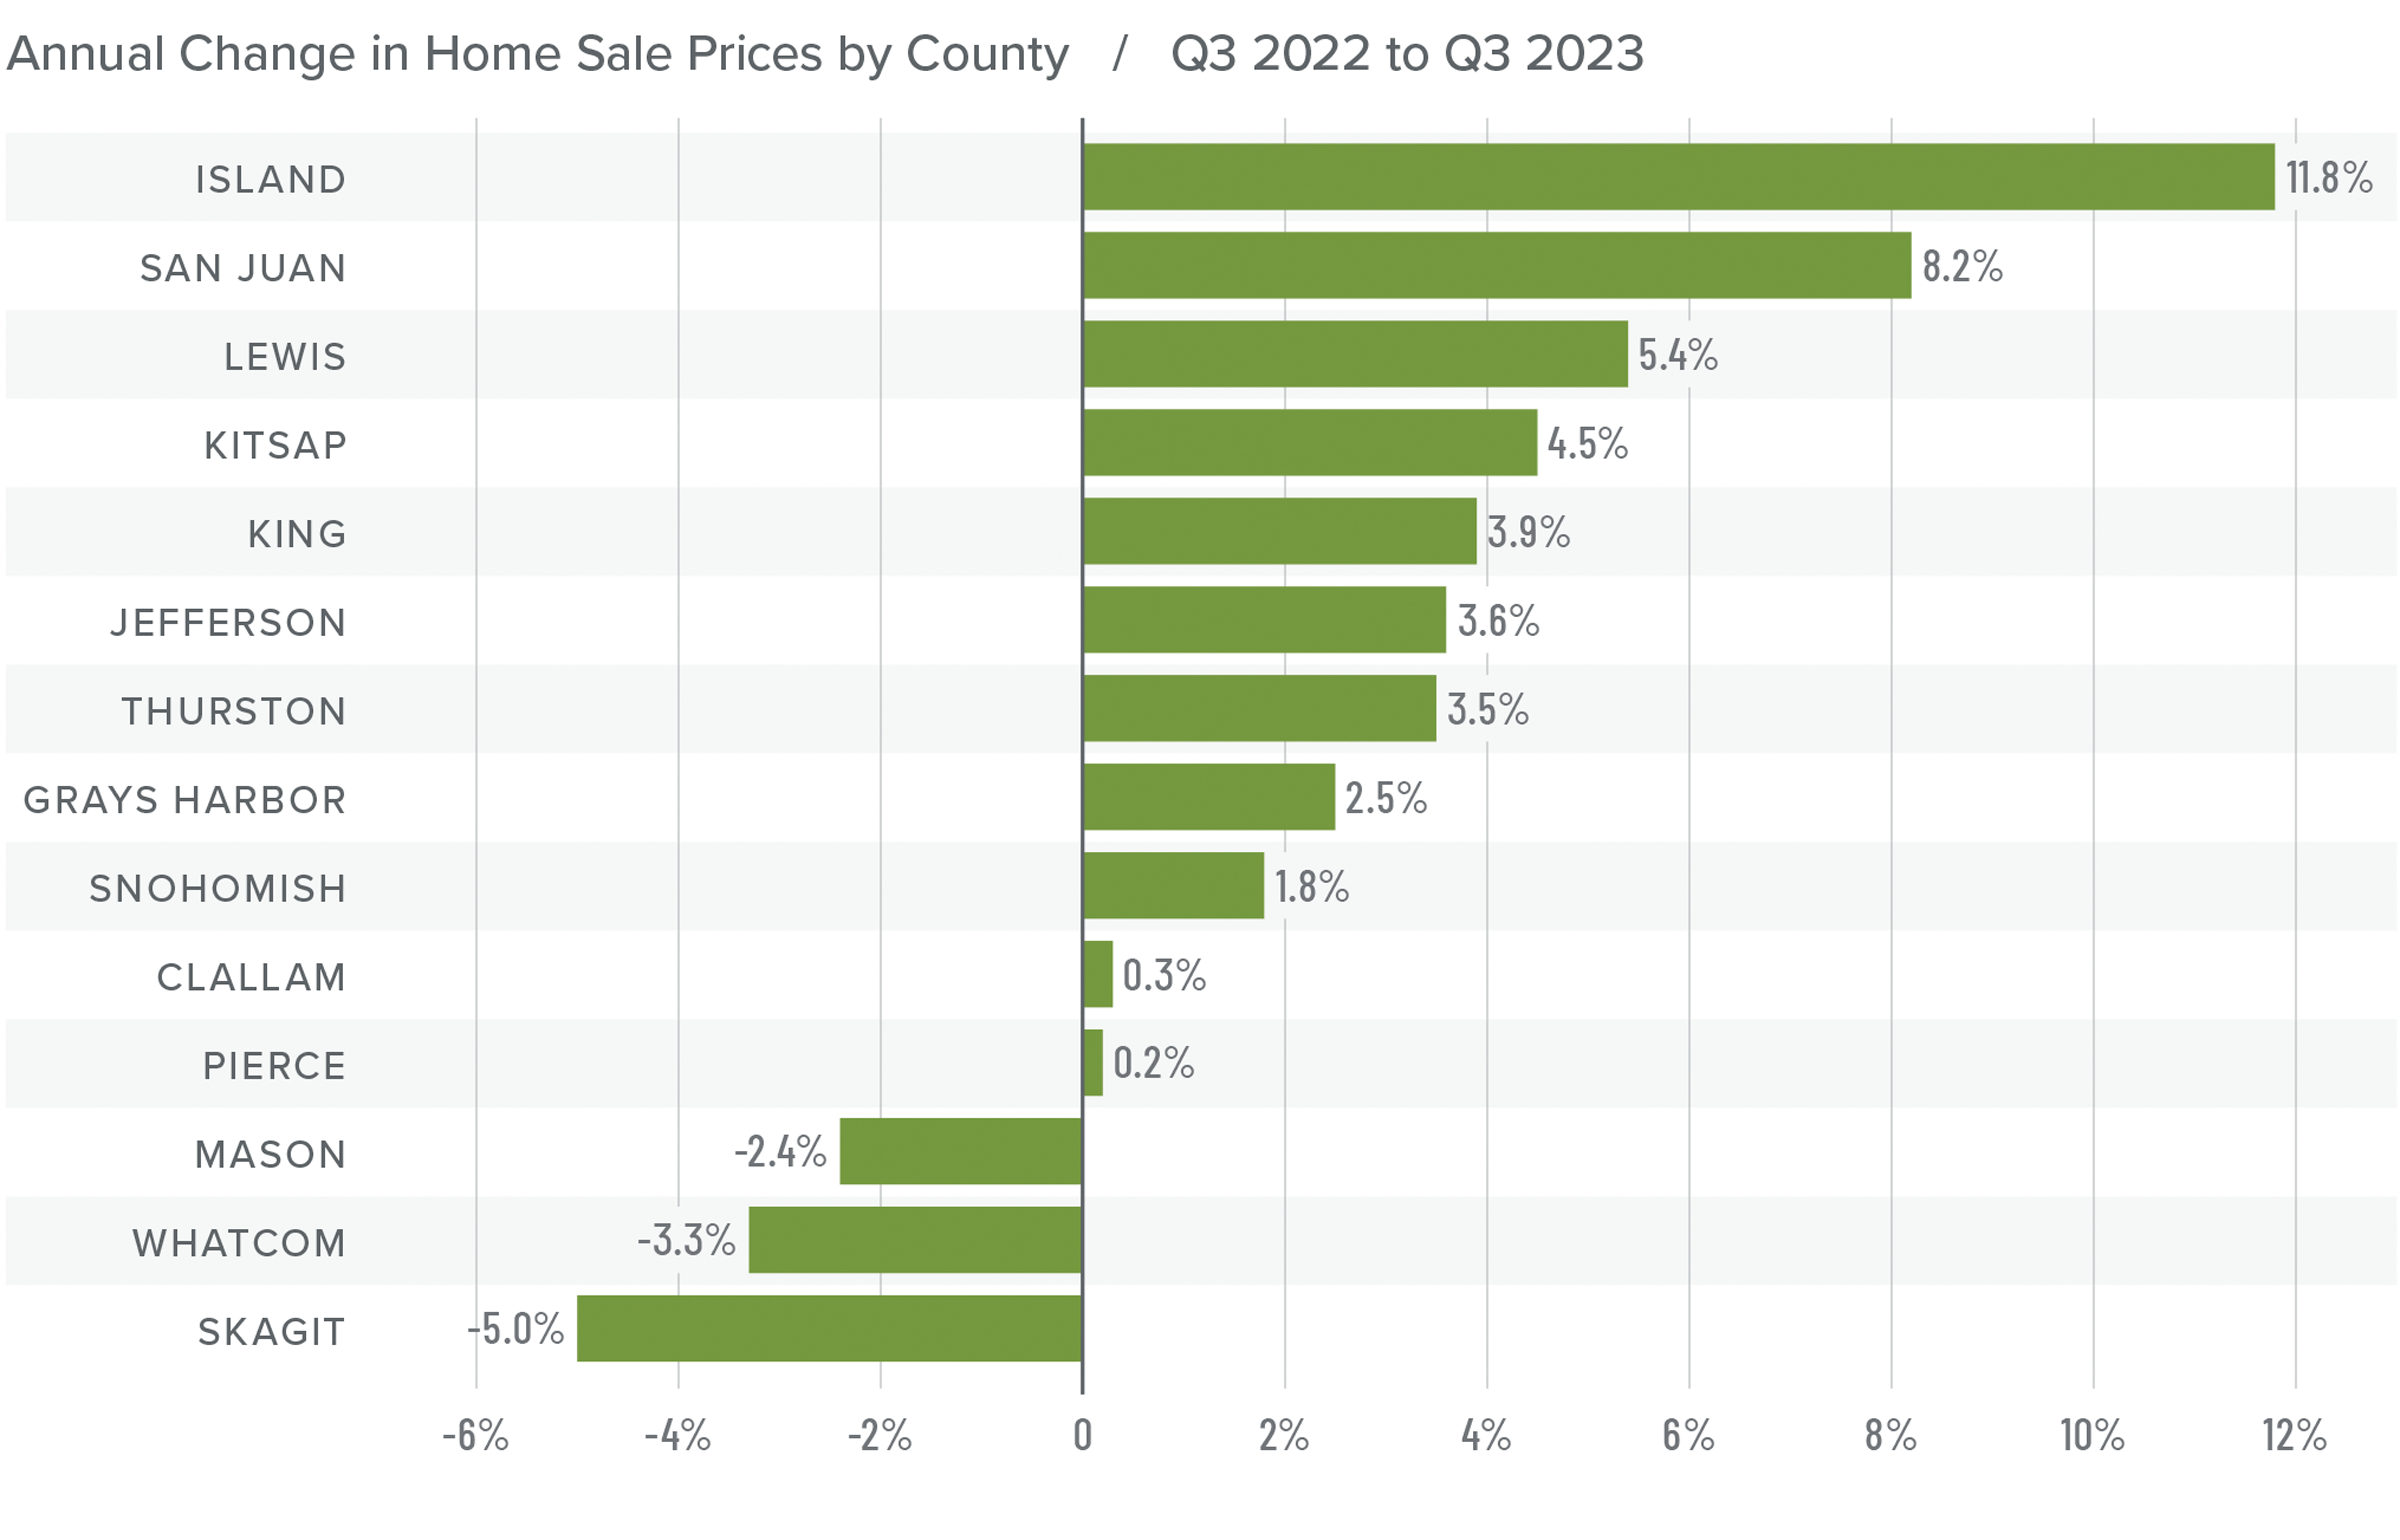 A bar graph showing the annual change in home sale prices by county in Western Washington from Q3 2022 to Q3 2023. Pierce County saw the least change with 0.2% increase, and Island saw the biggest increase at 11.8%. Skagit County's home prices decreased 5%.